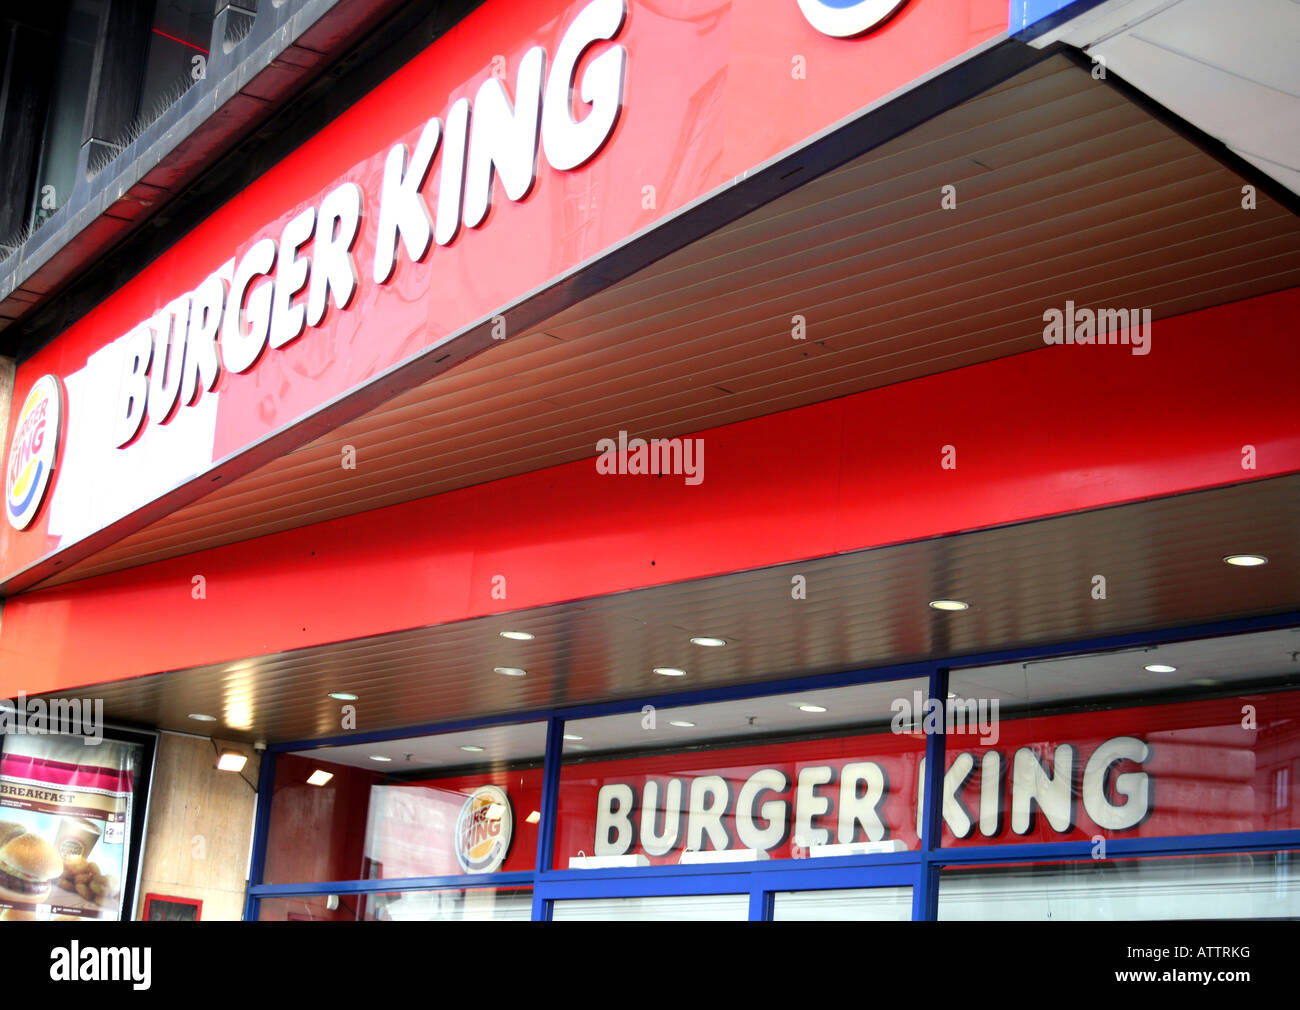 Typischen Fast Food-Kette Burger King Piccadilly Circus London  Stockfotografie - Alamy